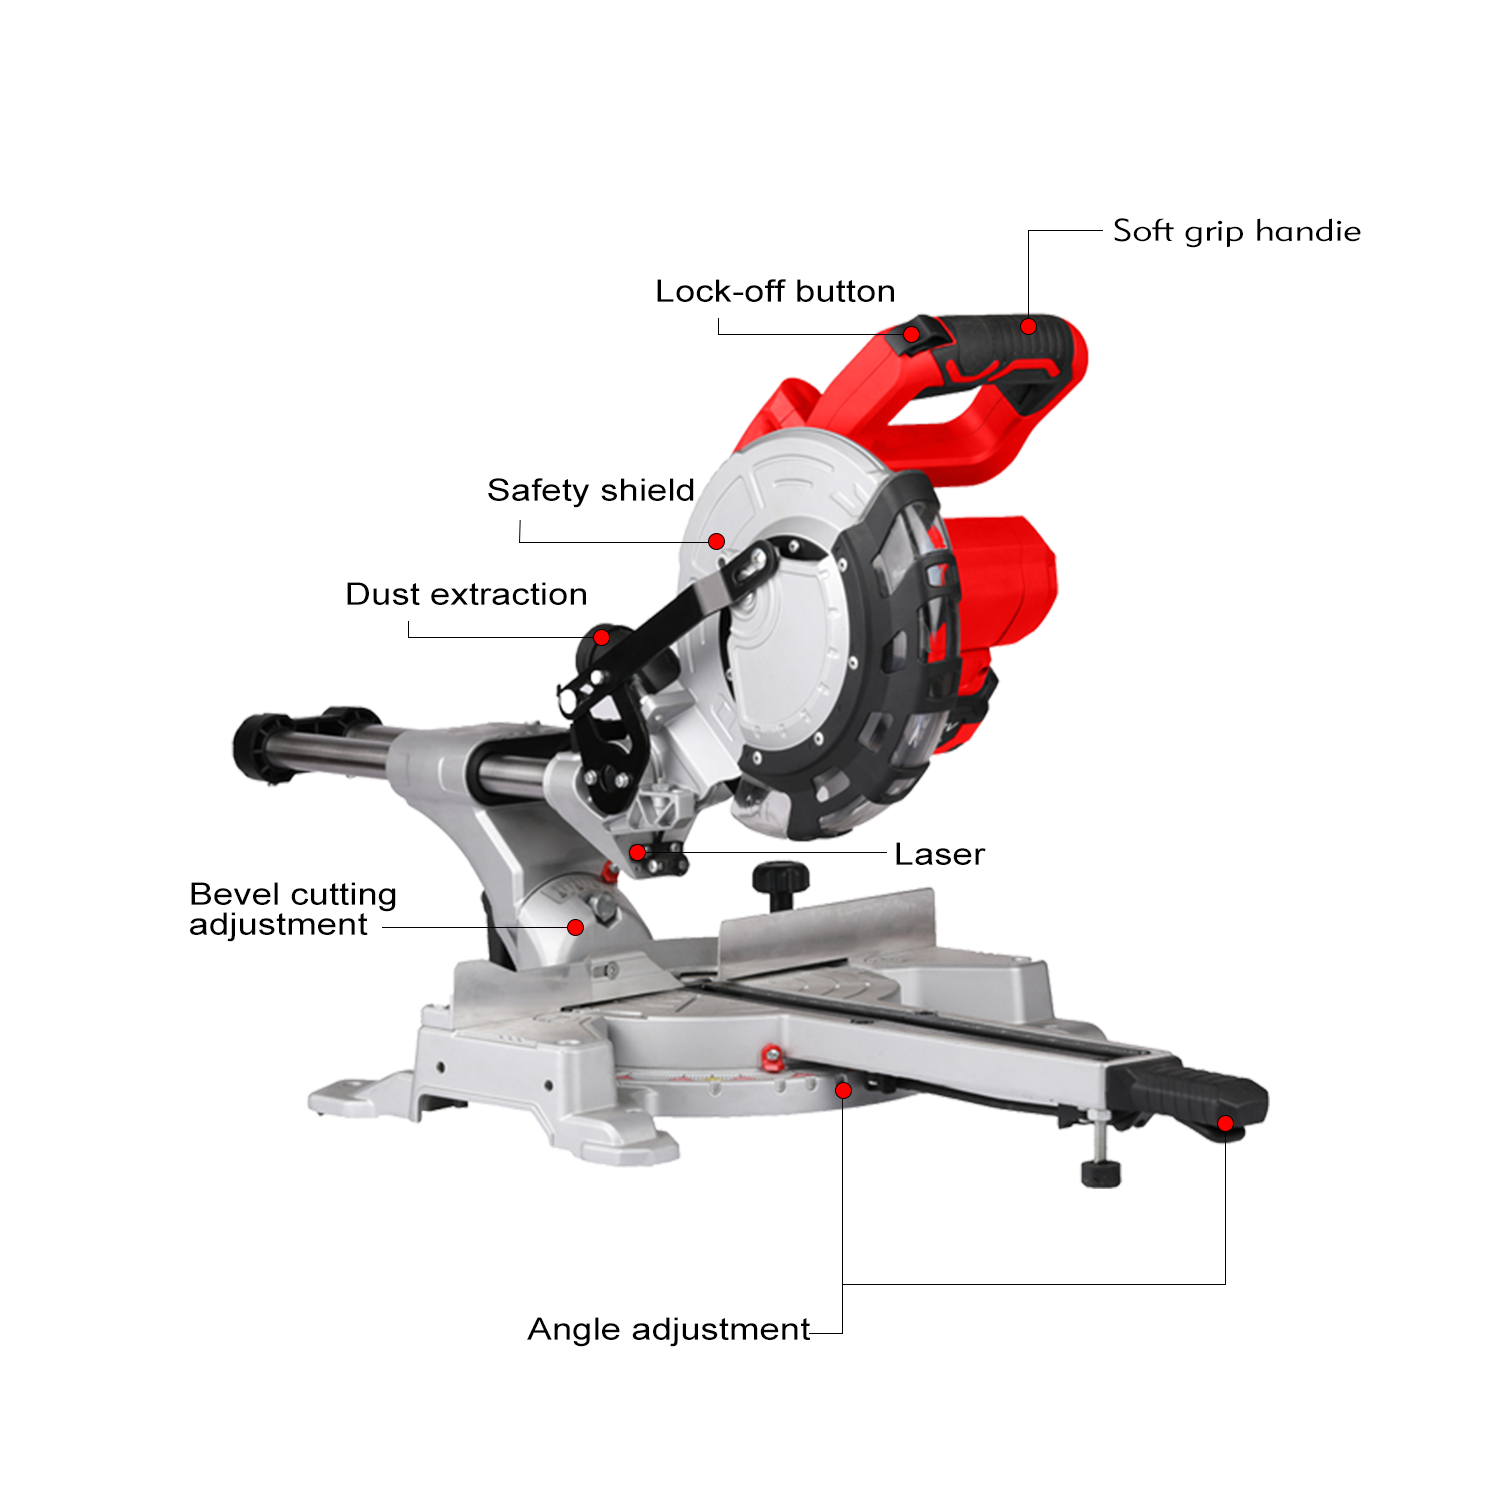 New Design Compound Electric Miter Saw for Aluminum And Wood Miter Saw Serra Circular Concrete Circular Saw